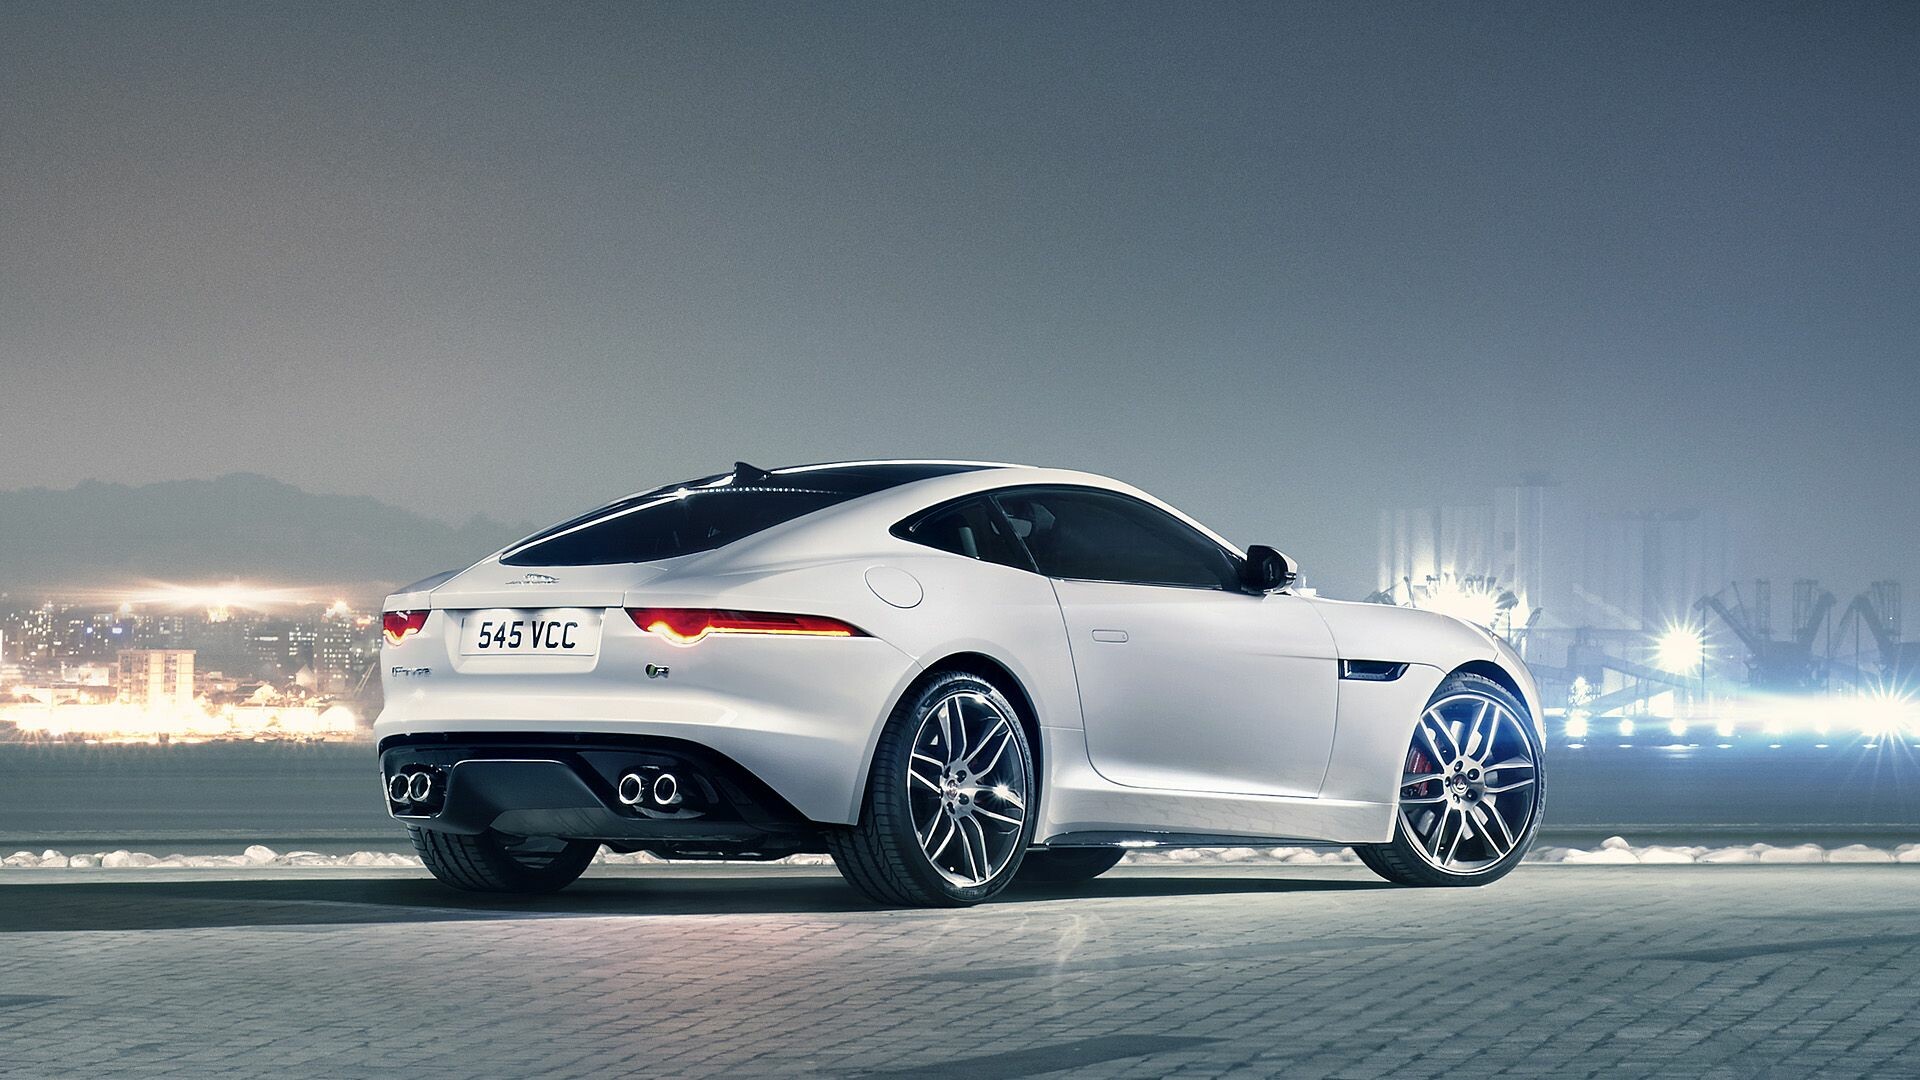 Jaguar Cars: F-type, A series of two-door, two-seater grand tourers manufactured by British luxury car manufacturer. 1920x1080 Full HD Wallpaper.